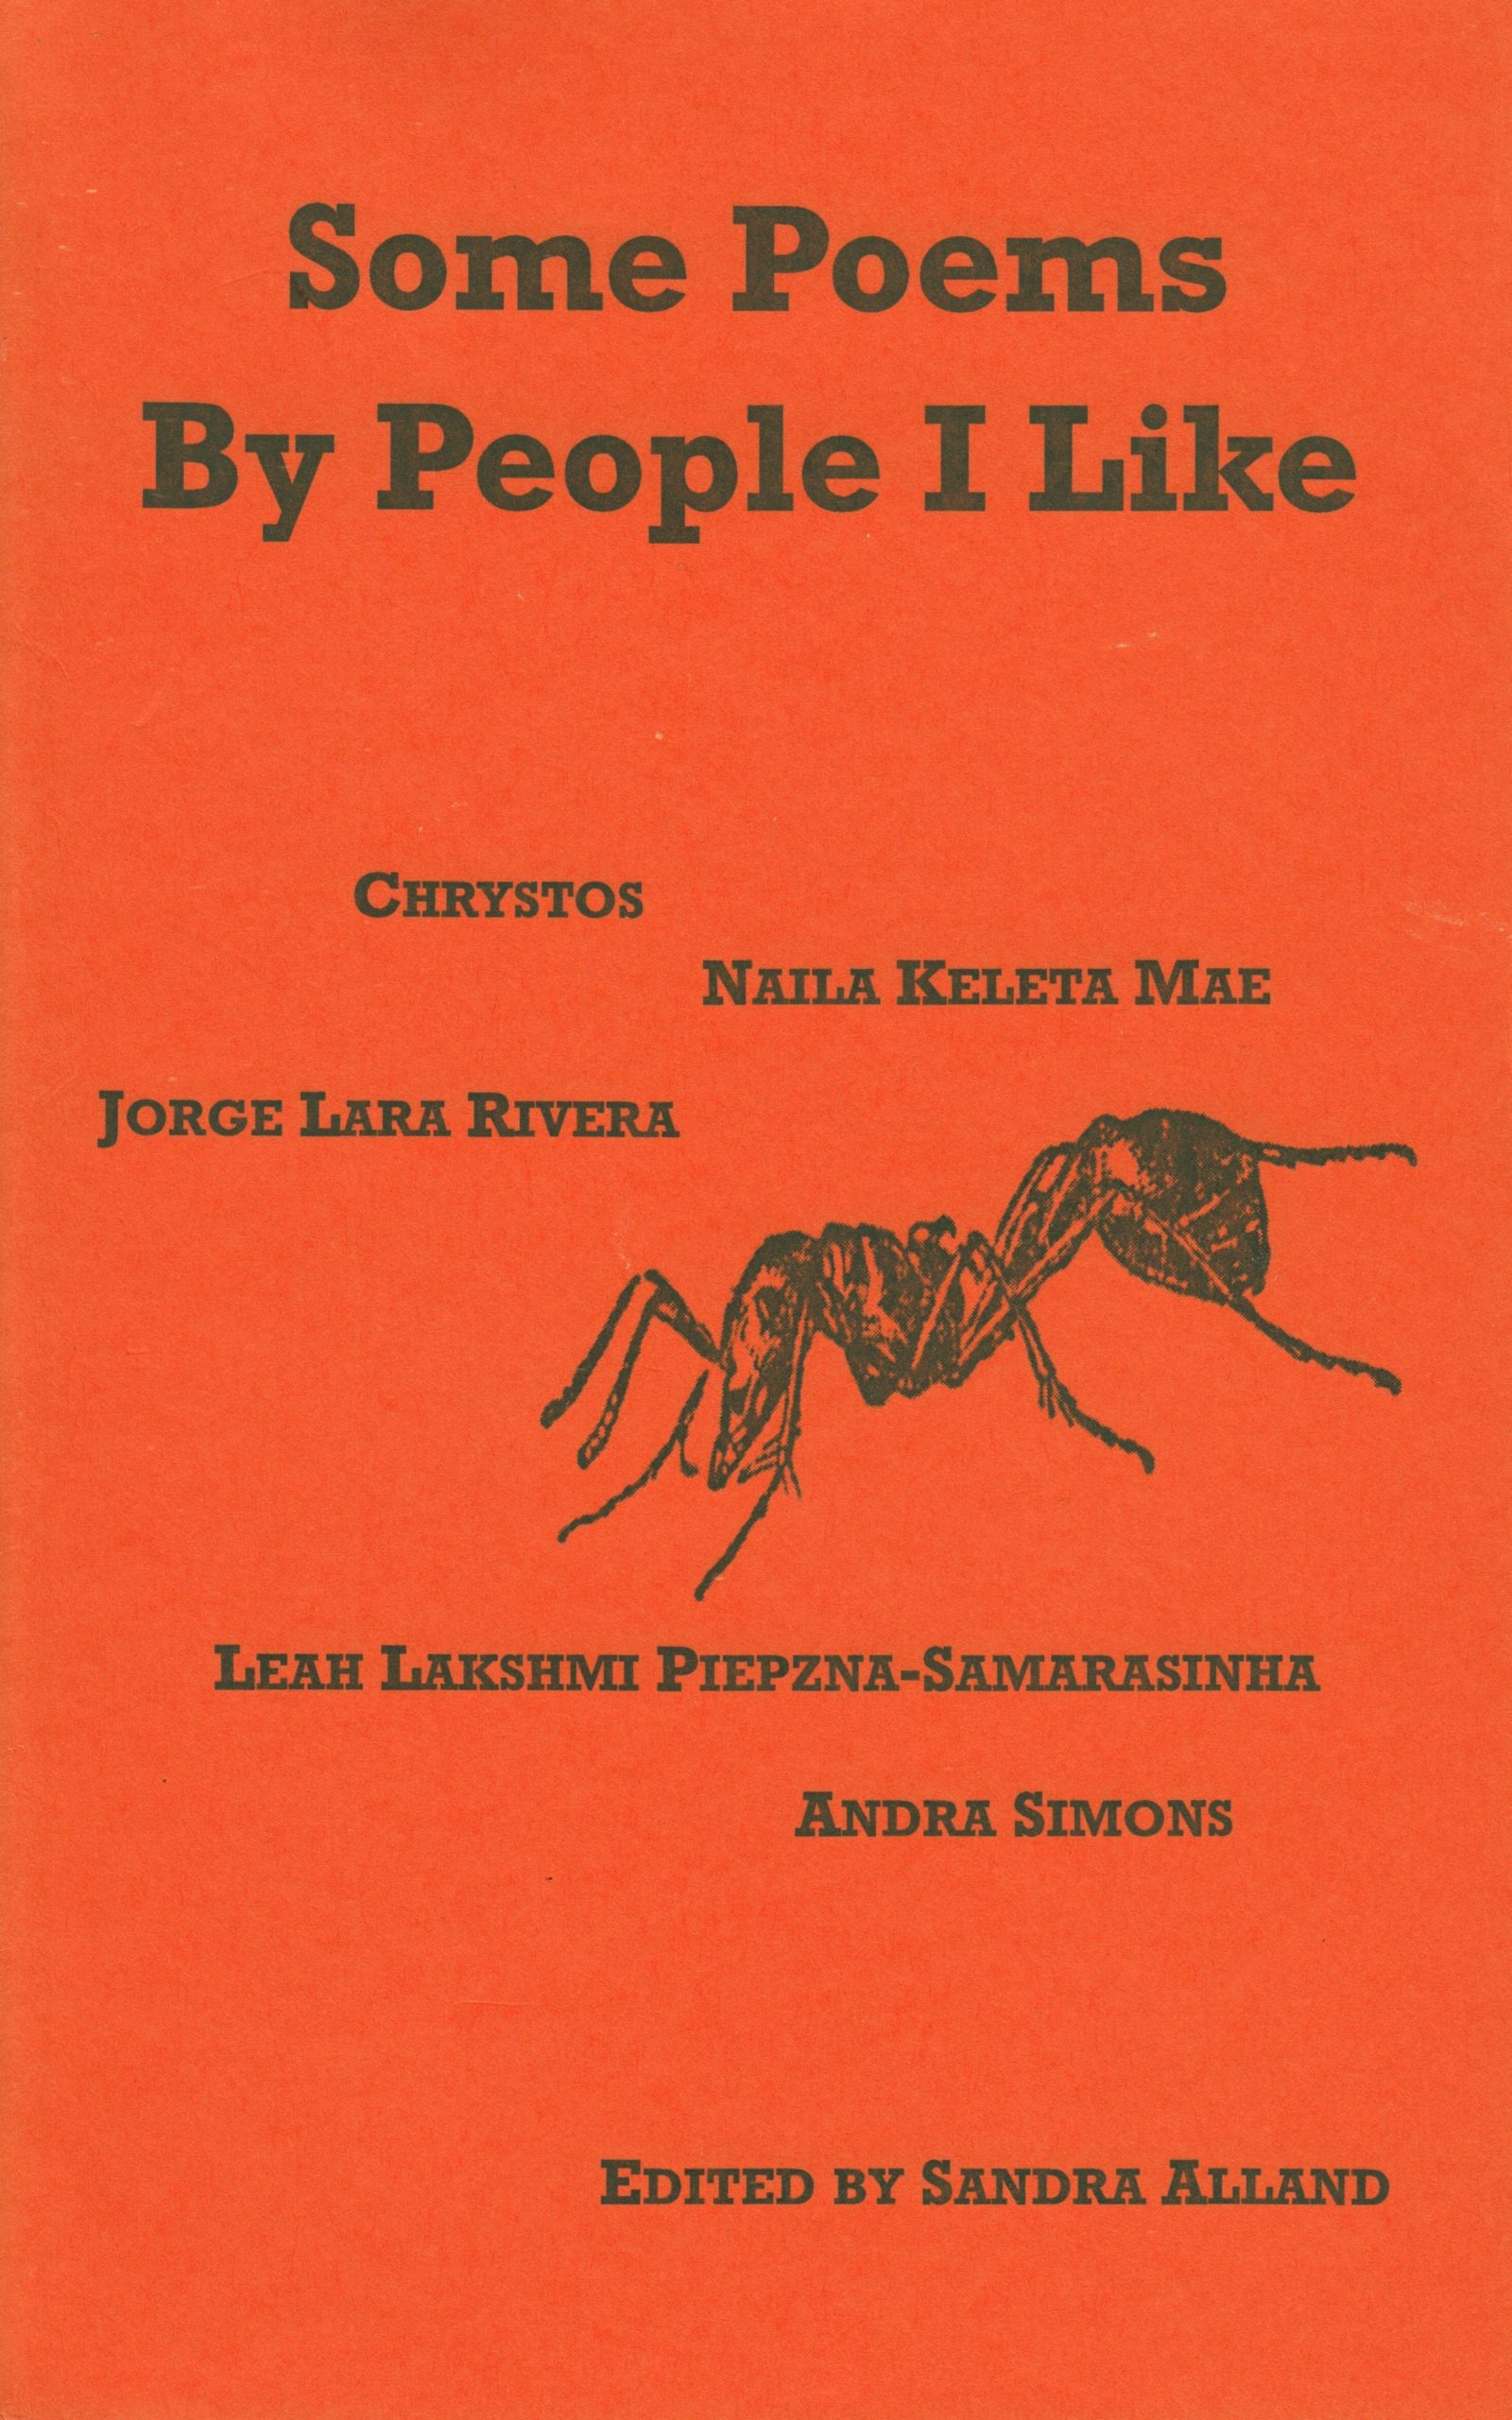 The cover of Some Poems by People I Like; edited by Sandra Alland. The cover is orange and features the book’s title above an encyclopedia’s illustration of an ant, all in black. Around the ant, the names of poets appear: Chrystos, Naila Keleta Mae, Jorge Lara Rivera, Leah Lakshmi Piepzna-Samarasinha, Andra Simons.